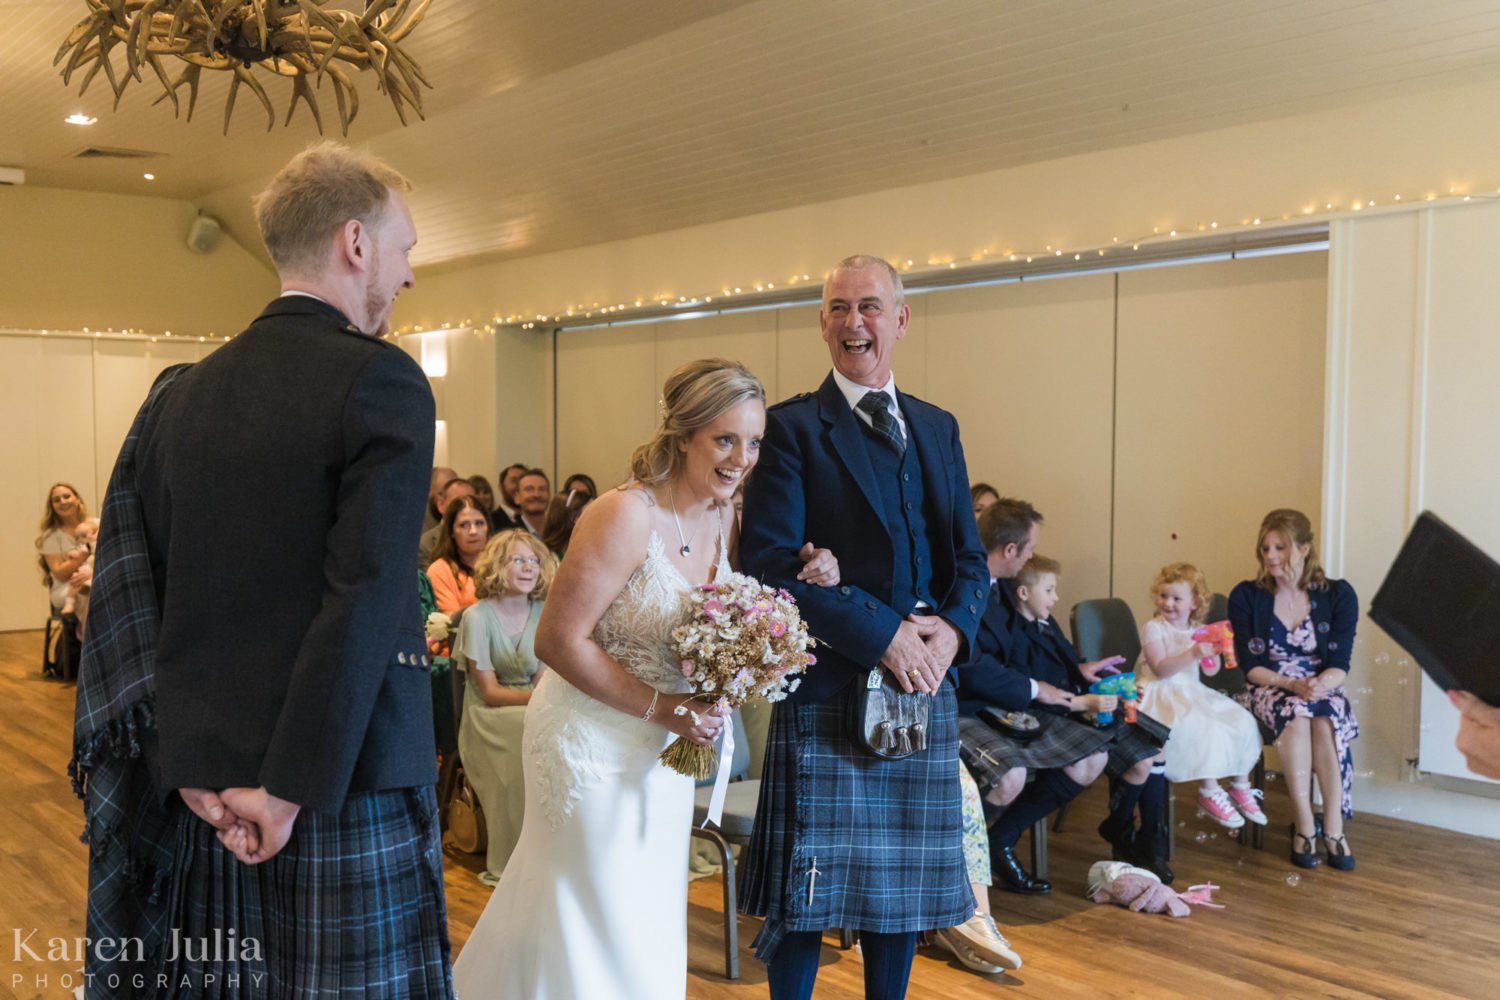 bride and her dad arm in arm and laughing during the wedding ceremony at Loch Lomond Arms